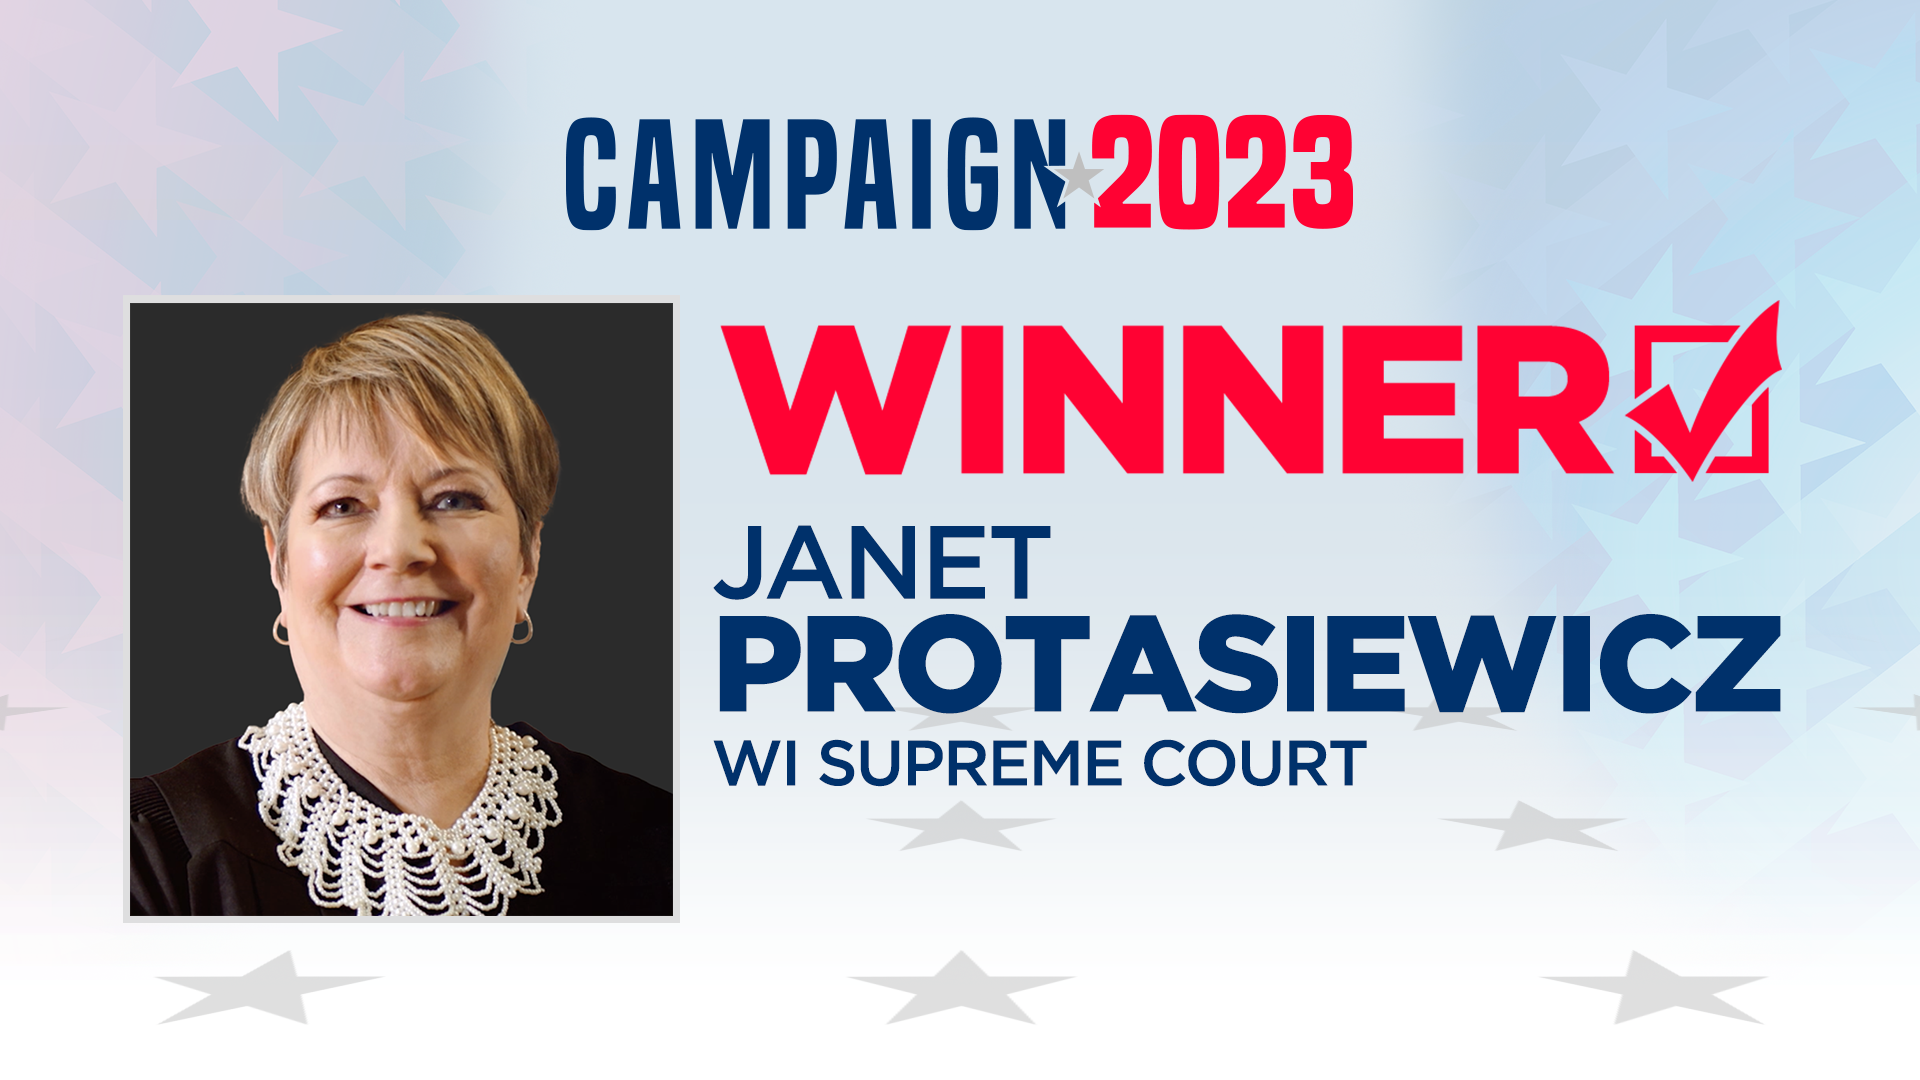 Janet Protasiewicz wins election to Wisconsin Supreme Court